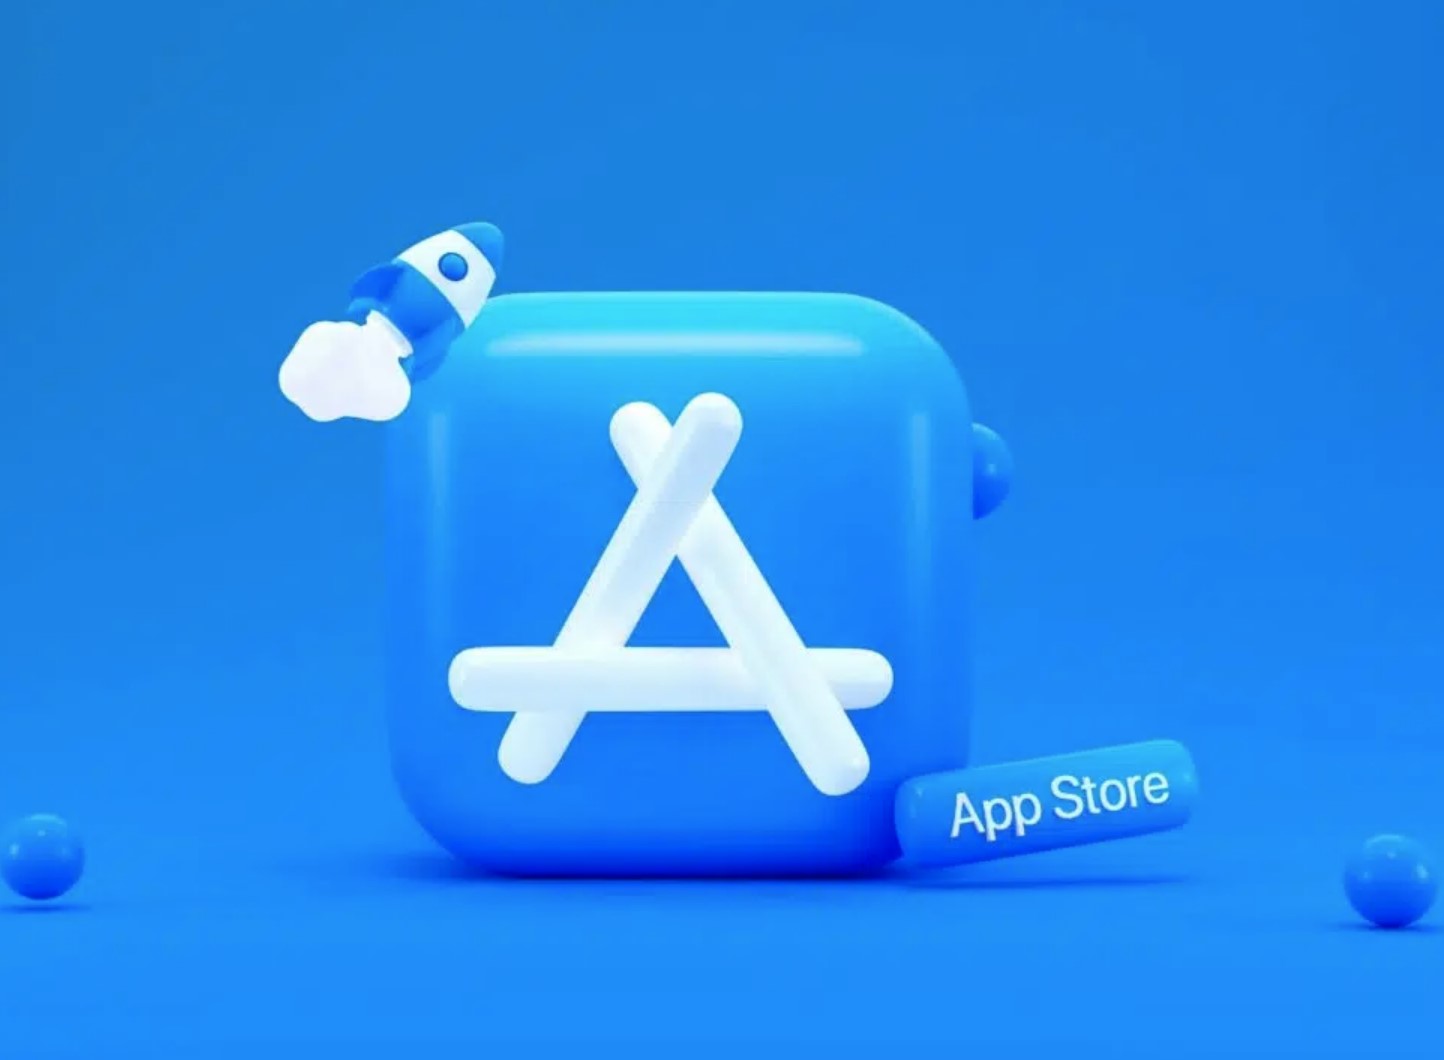 Apple culling 541697 Apps in Q3 from its App Store – nearly 25% trashed